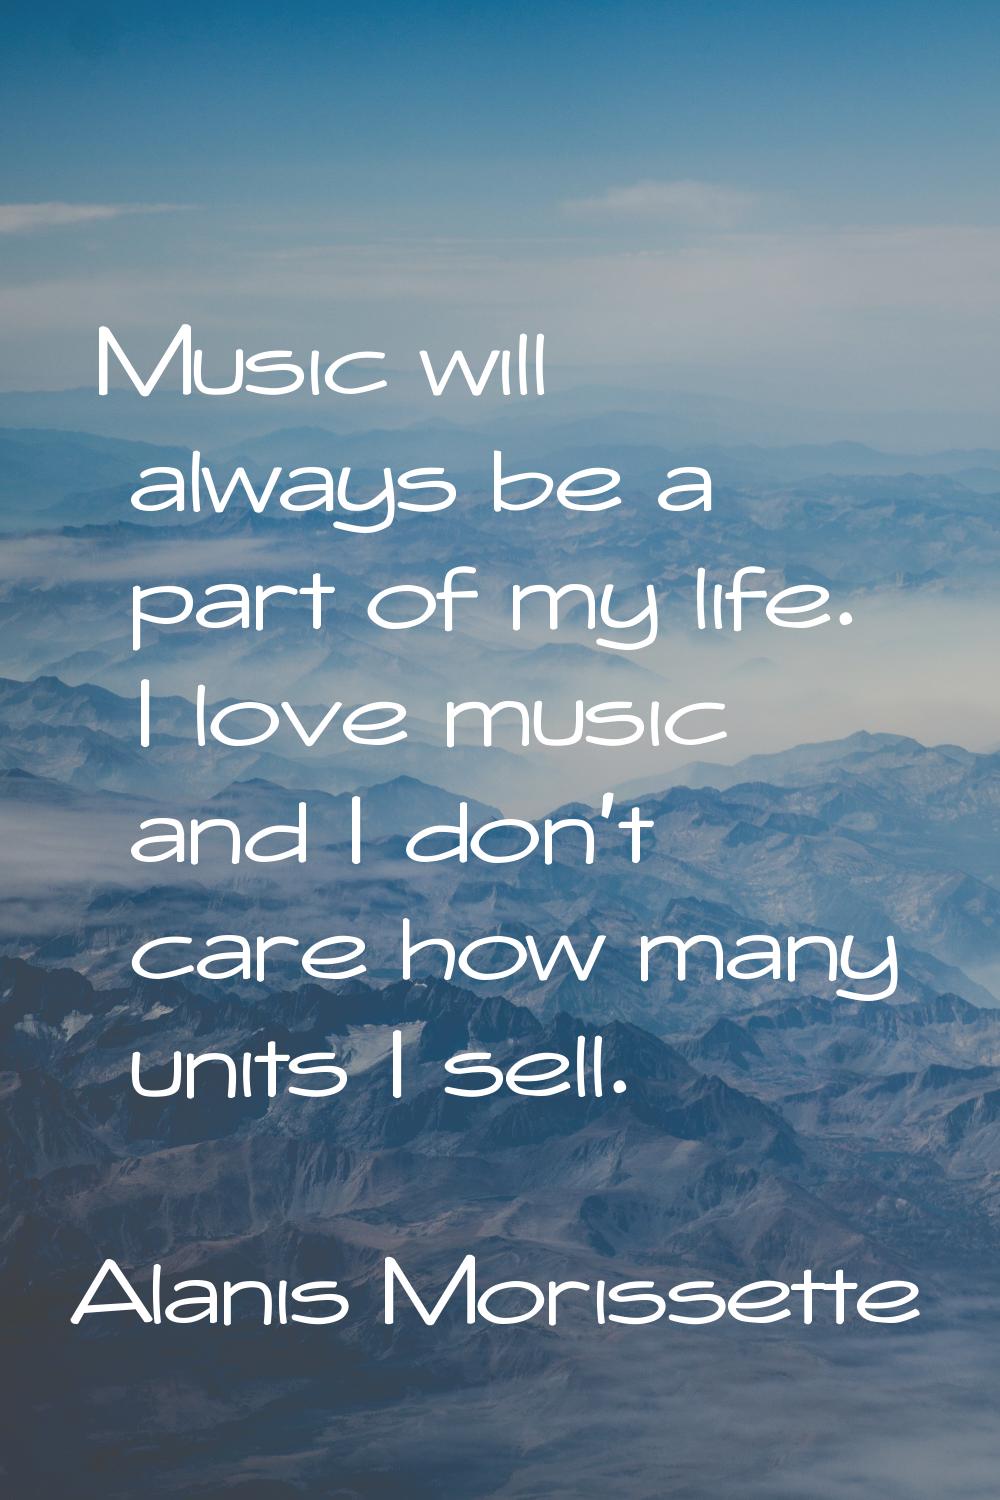 Music will always be a part of my life. I love music and I don't care how many units I sell.